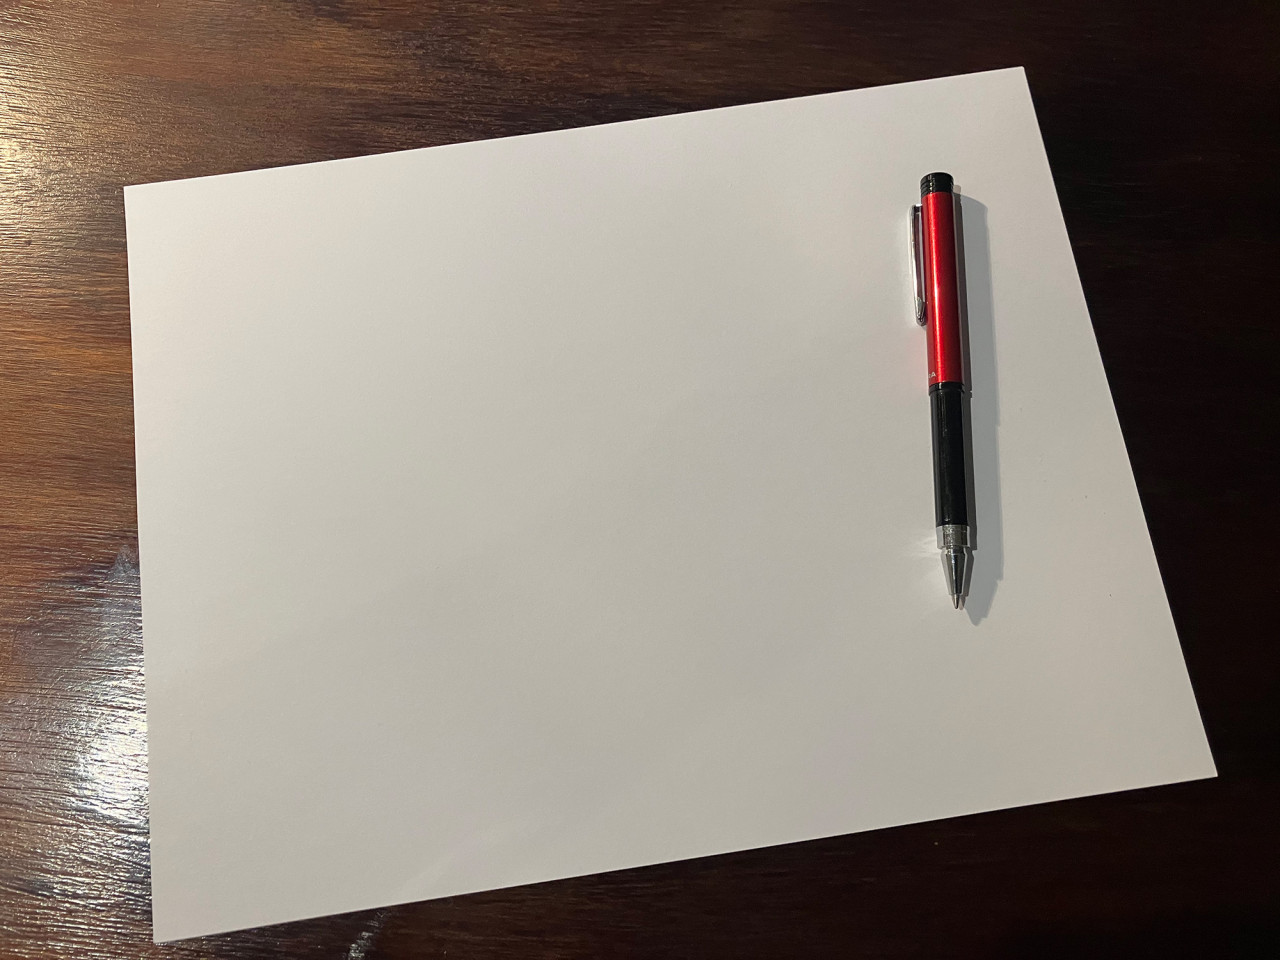 A blank piece of paper on my desk, with one of my favorite Zebra ball point pens.